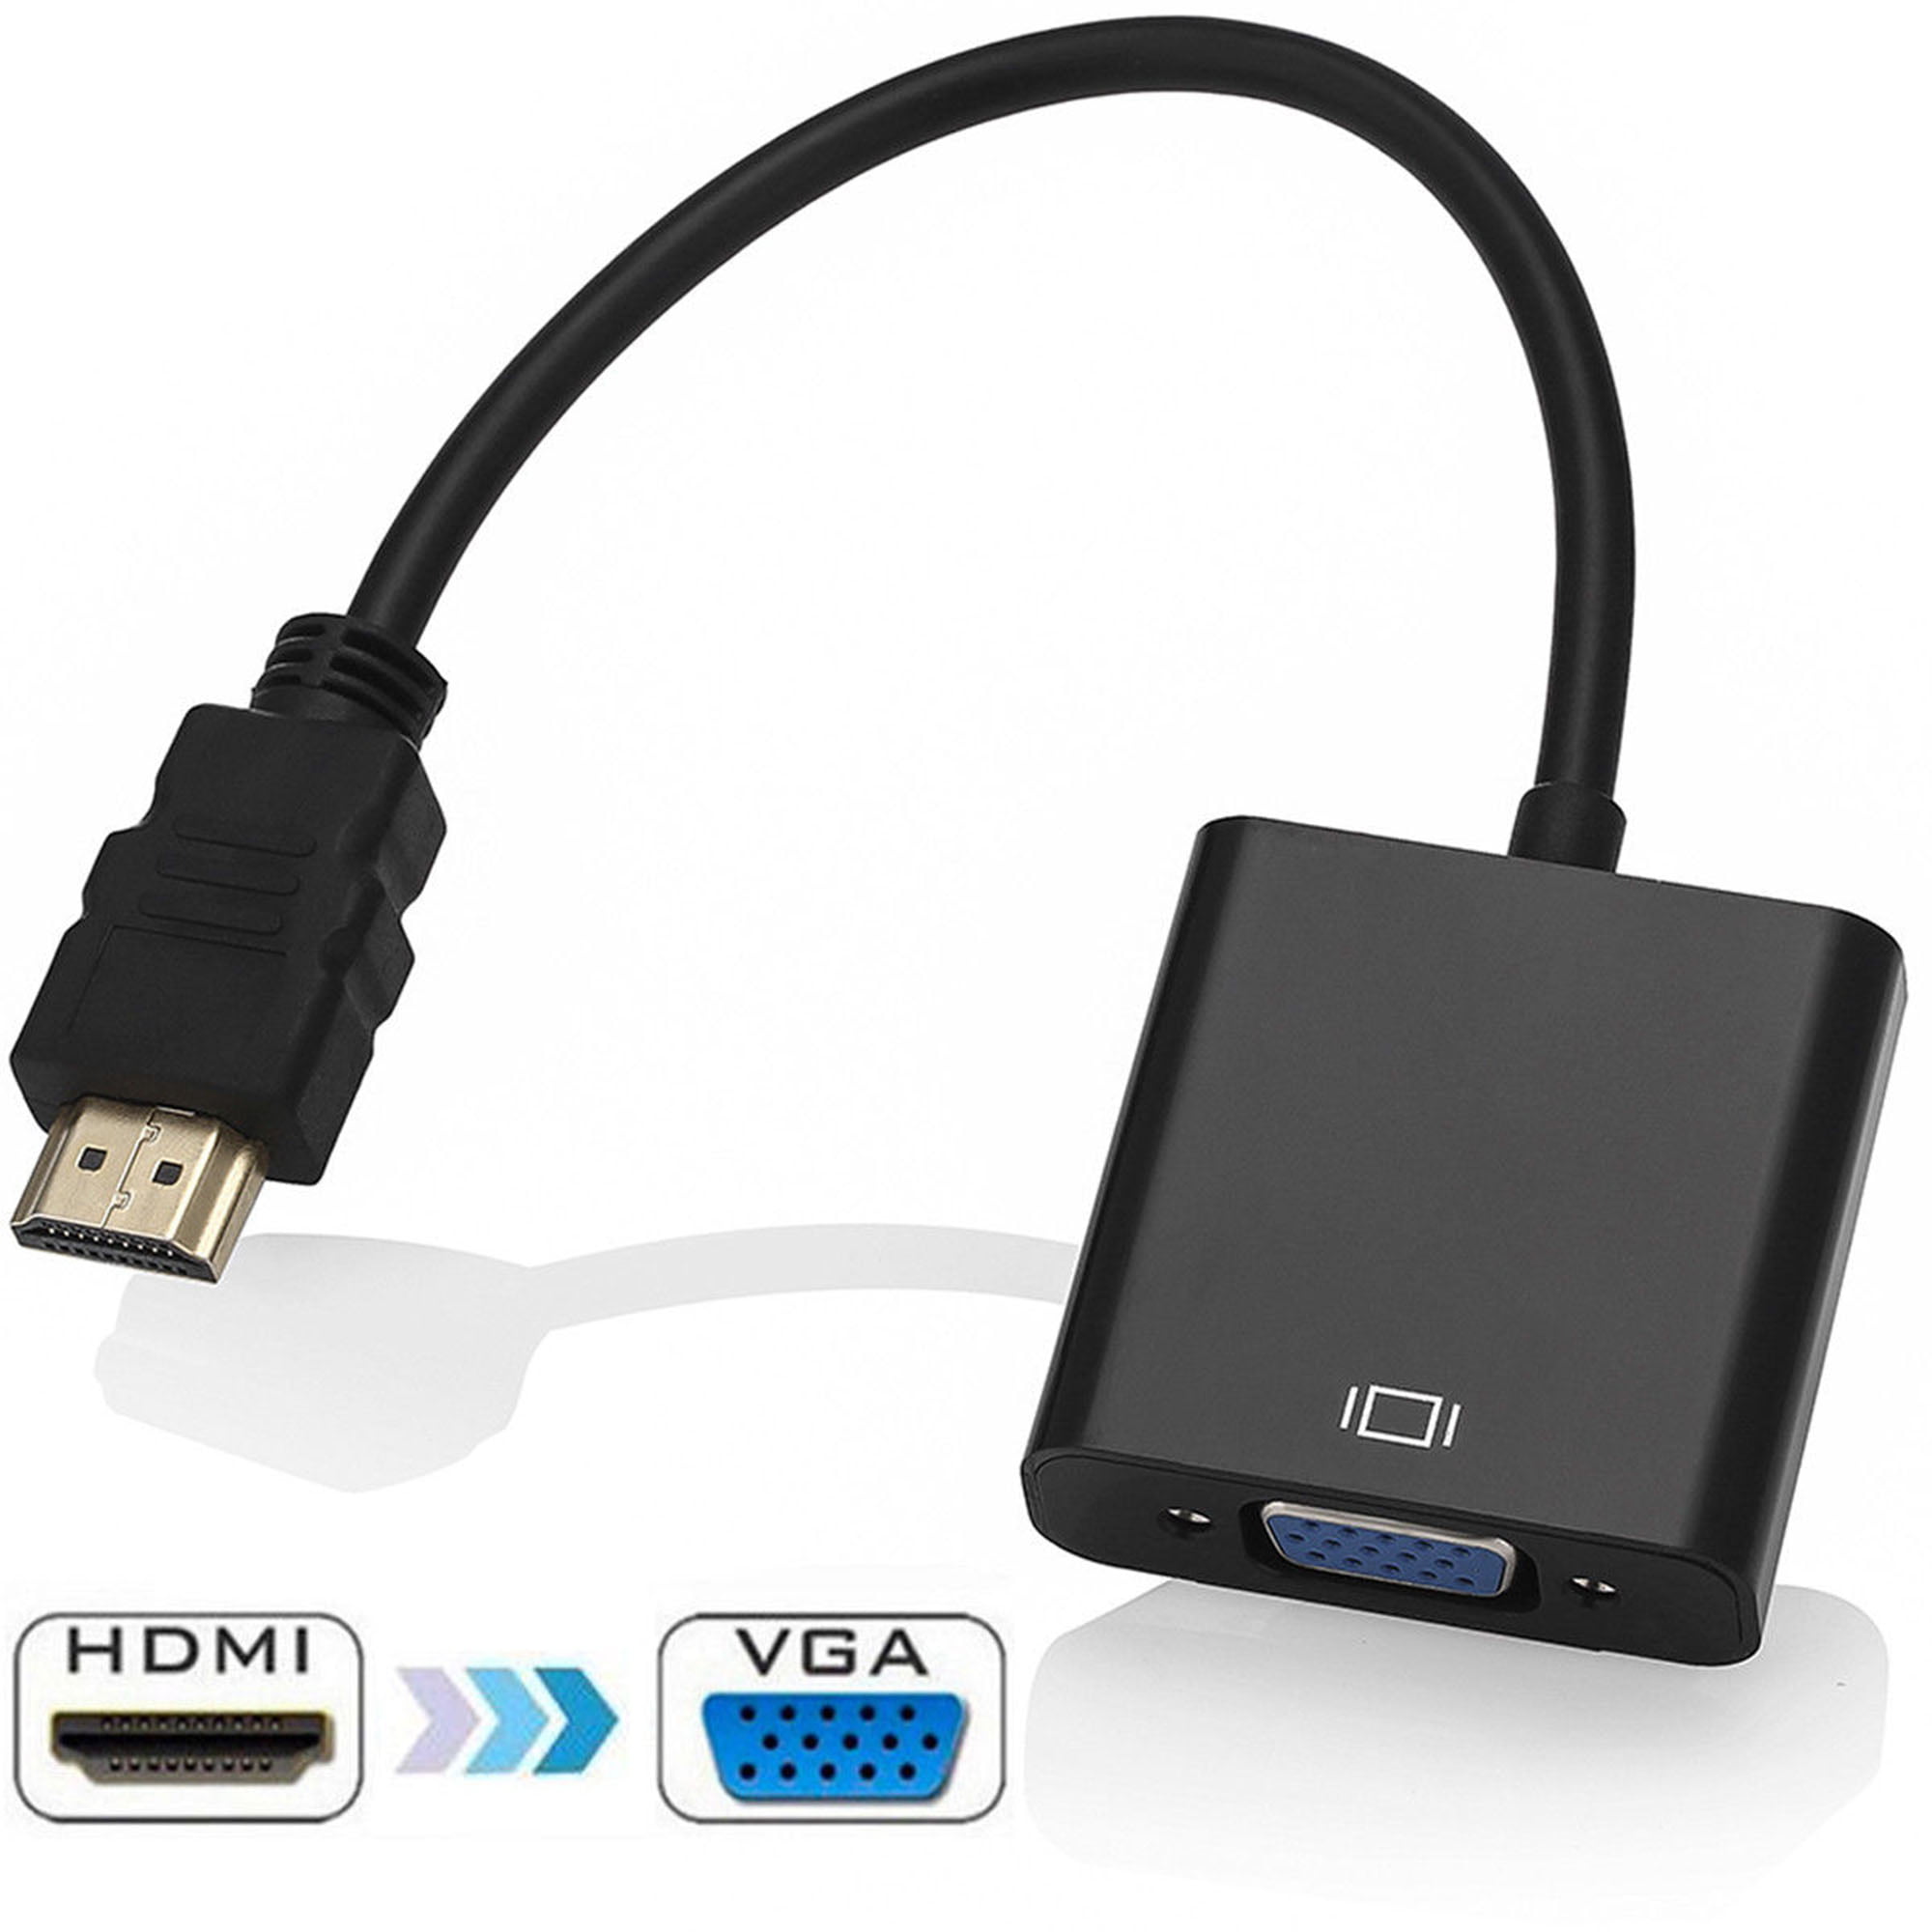 Mini HDMI to VGA Converter with USB Cable,HDMI 2 VGA Adapter 1080P Audio White for Laptop PC PS3 Xbox STB Blu-ray TV Stick